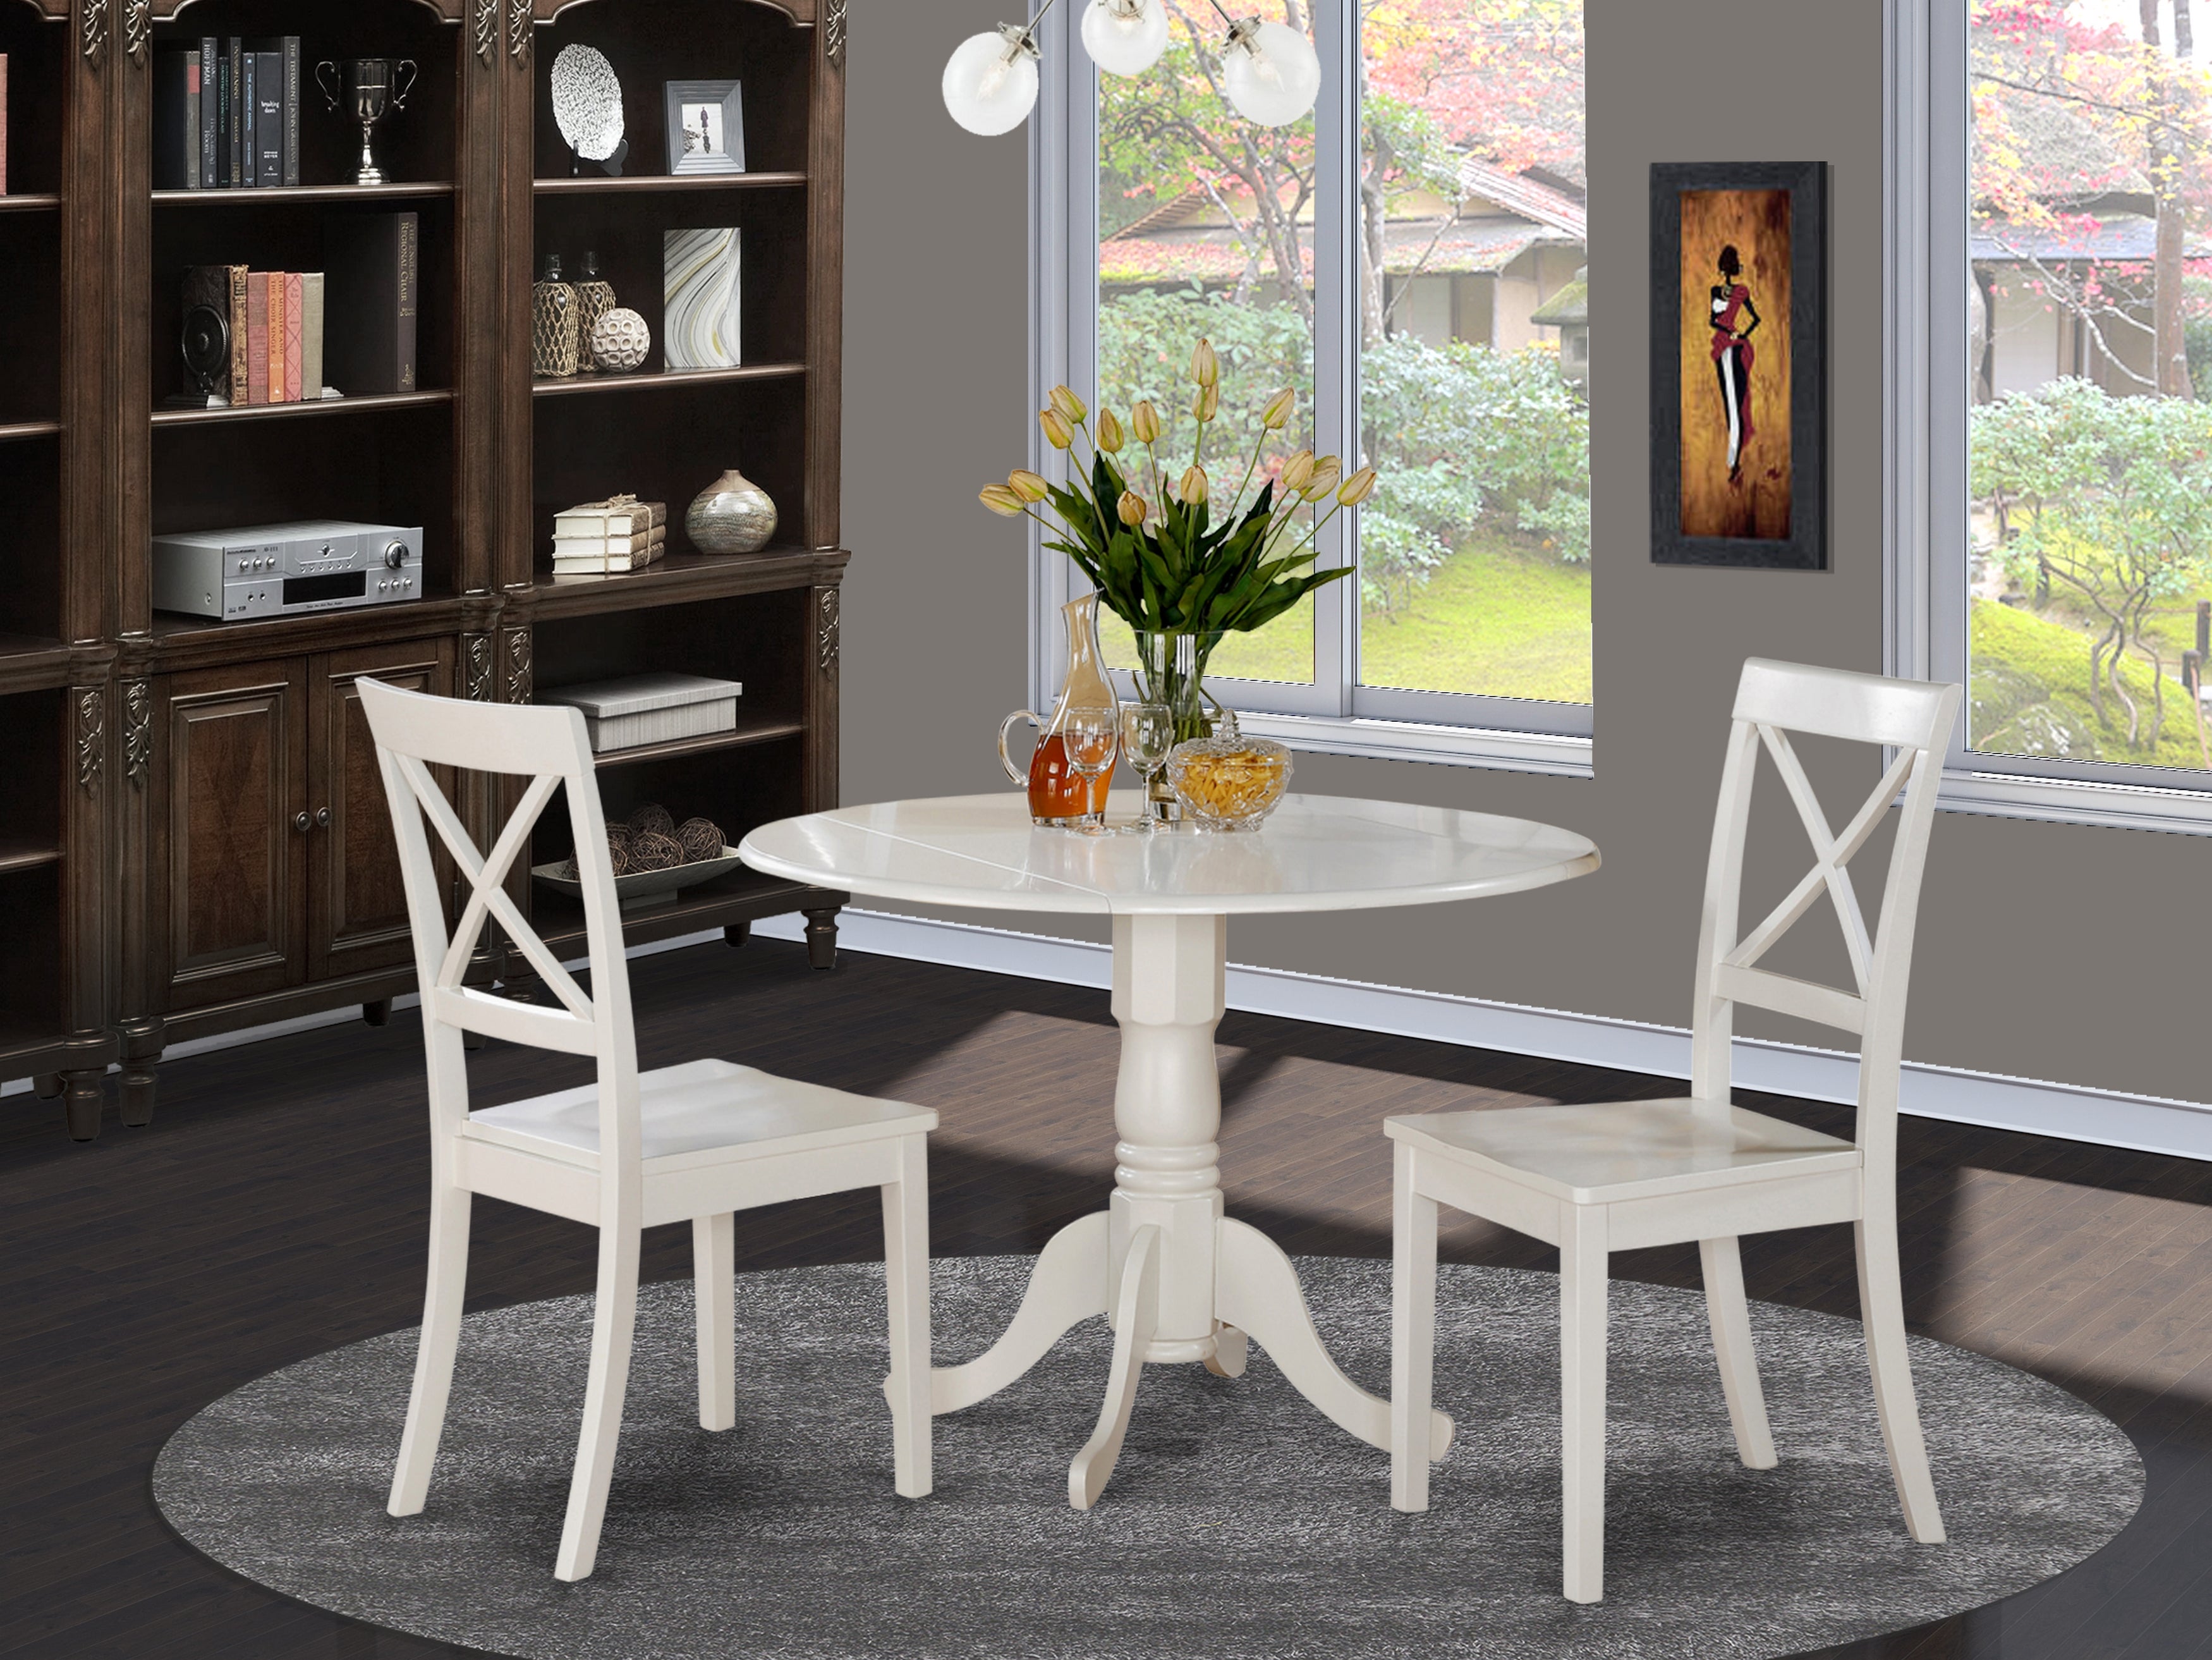 3 PC Dining Dinnette 42" Dropleaf Table and 2 Cross Back Chairs Set in White